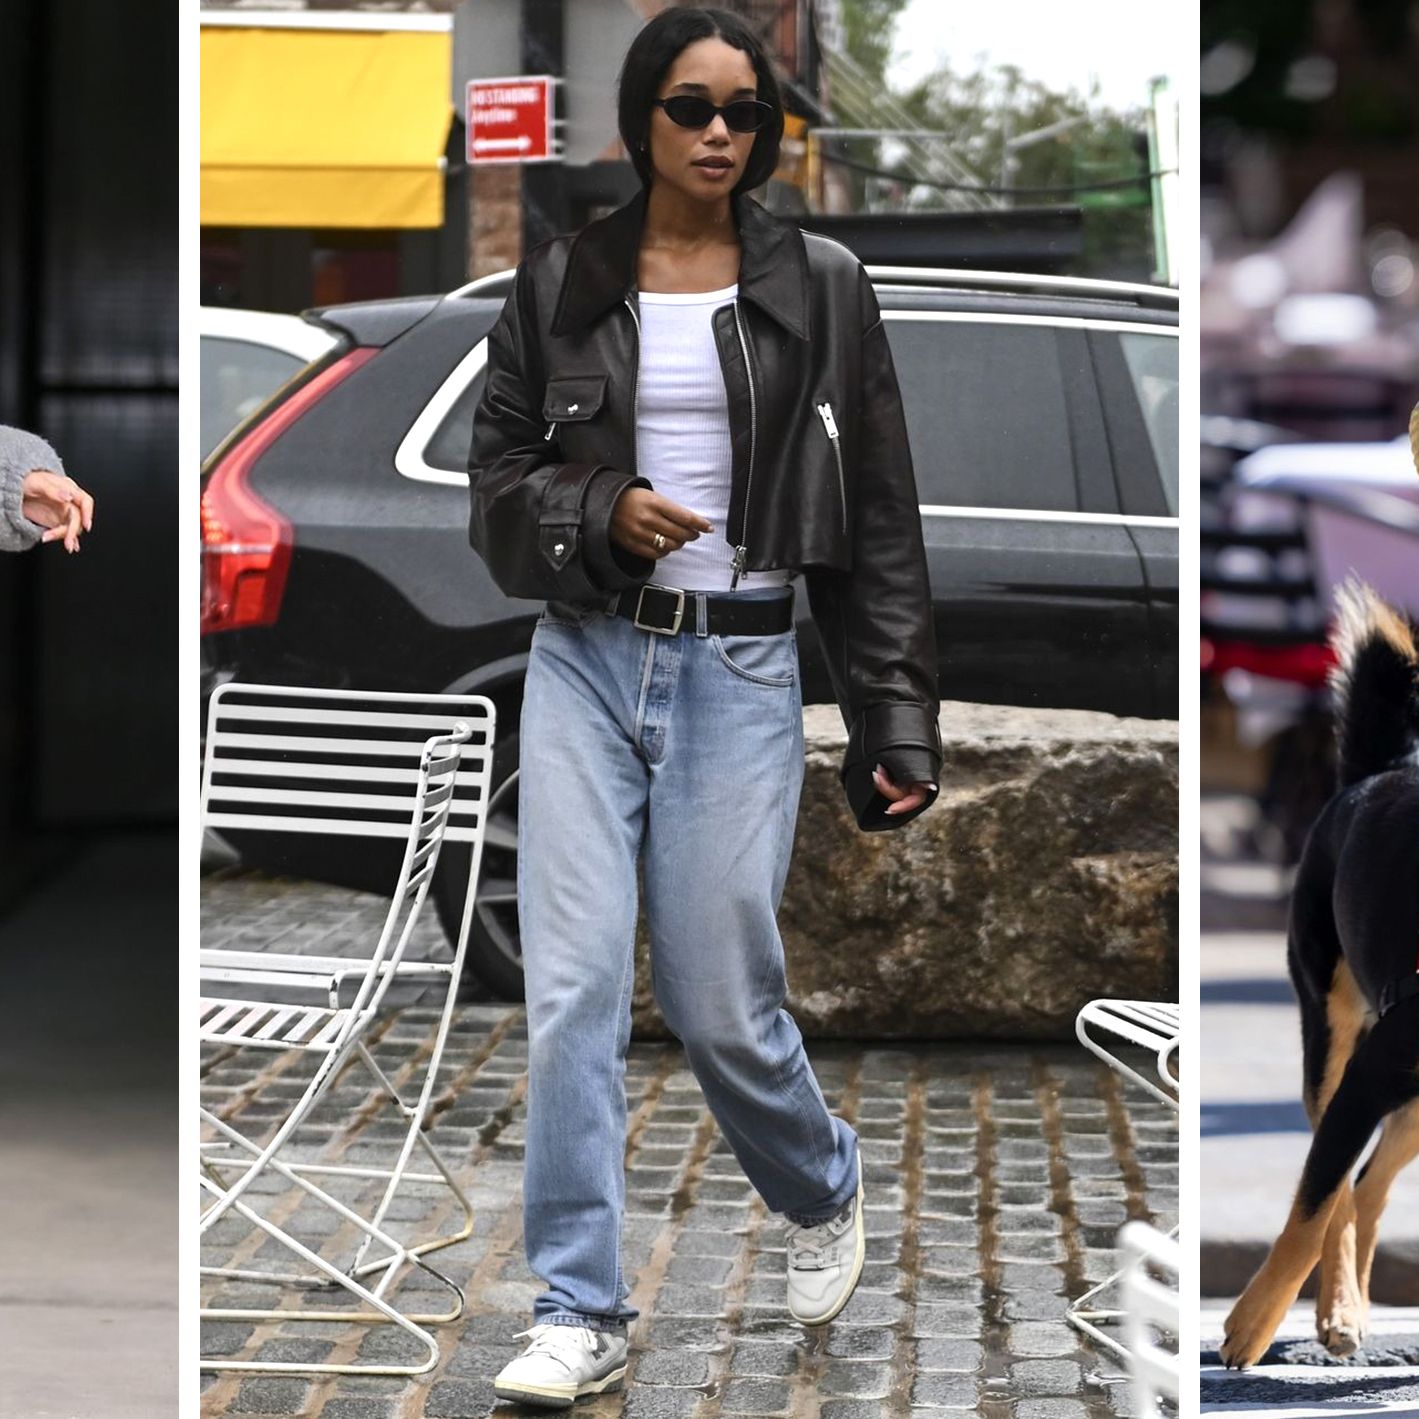 Celebrities Can't Get Enough of These $120 New Balance Sneakers